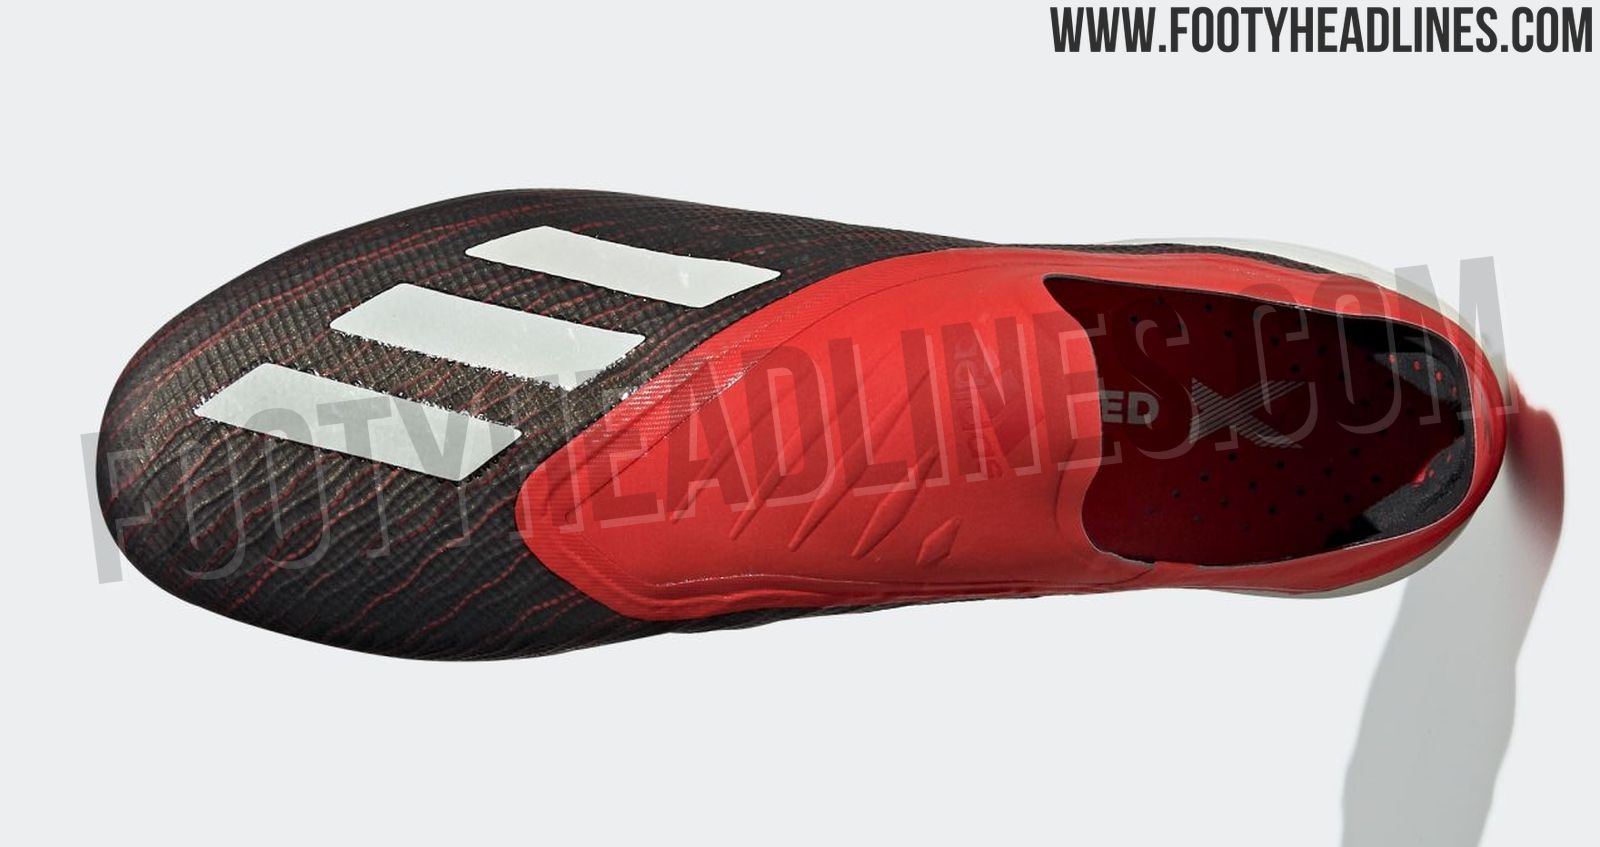 Black / Red / White Adidas X 18+ 'Initiator' Boots Leaked - Footy Headlines